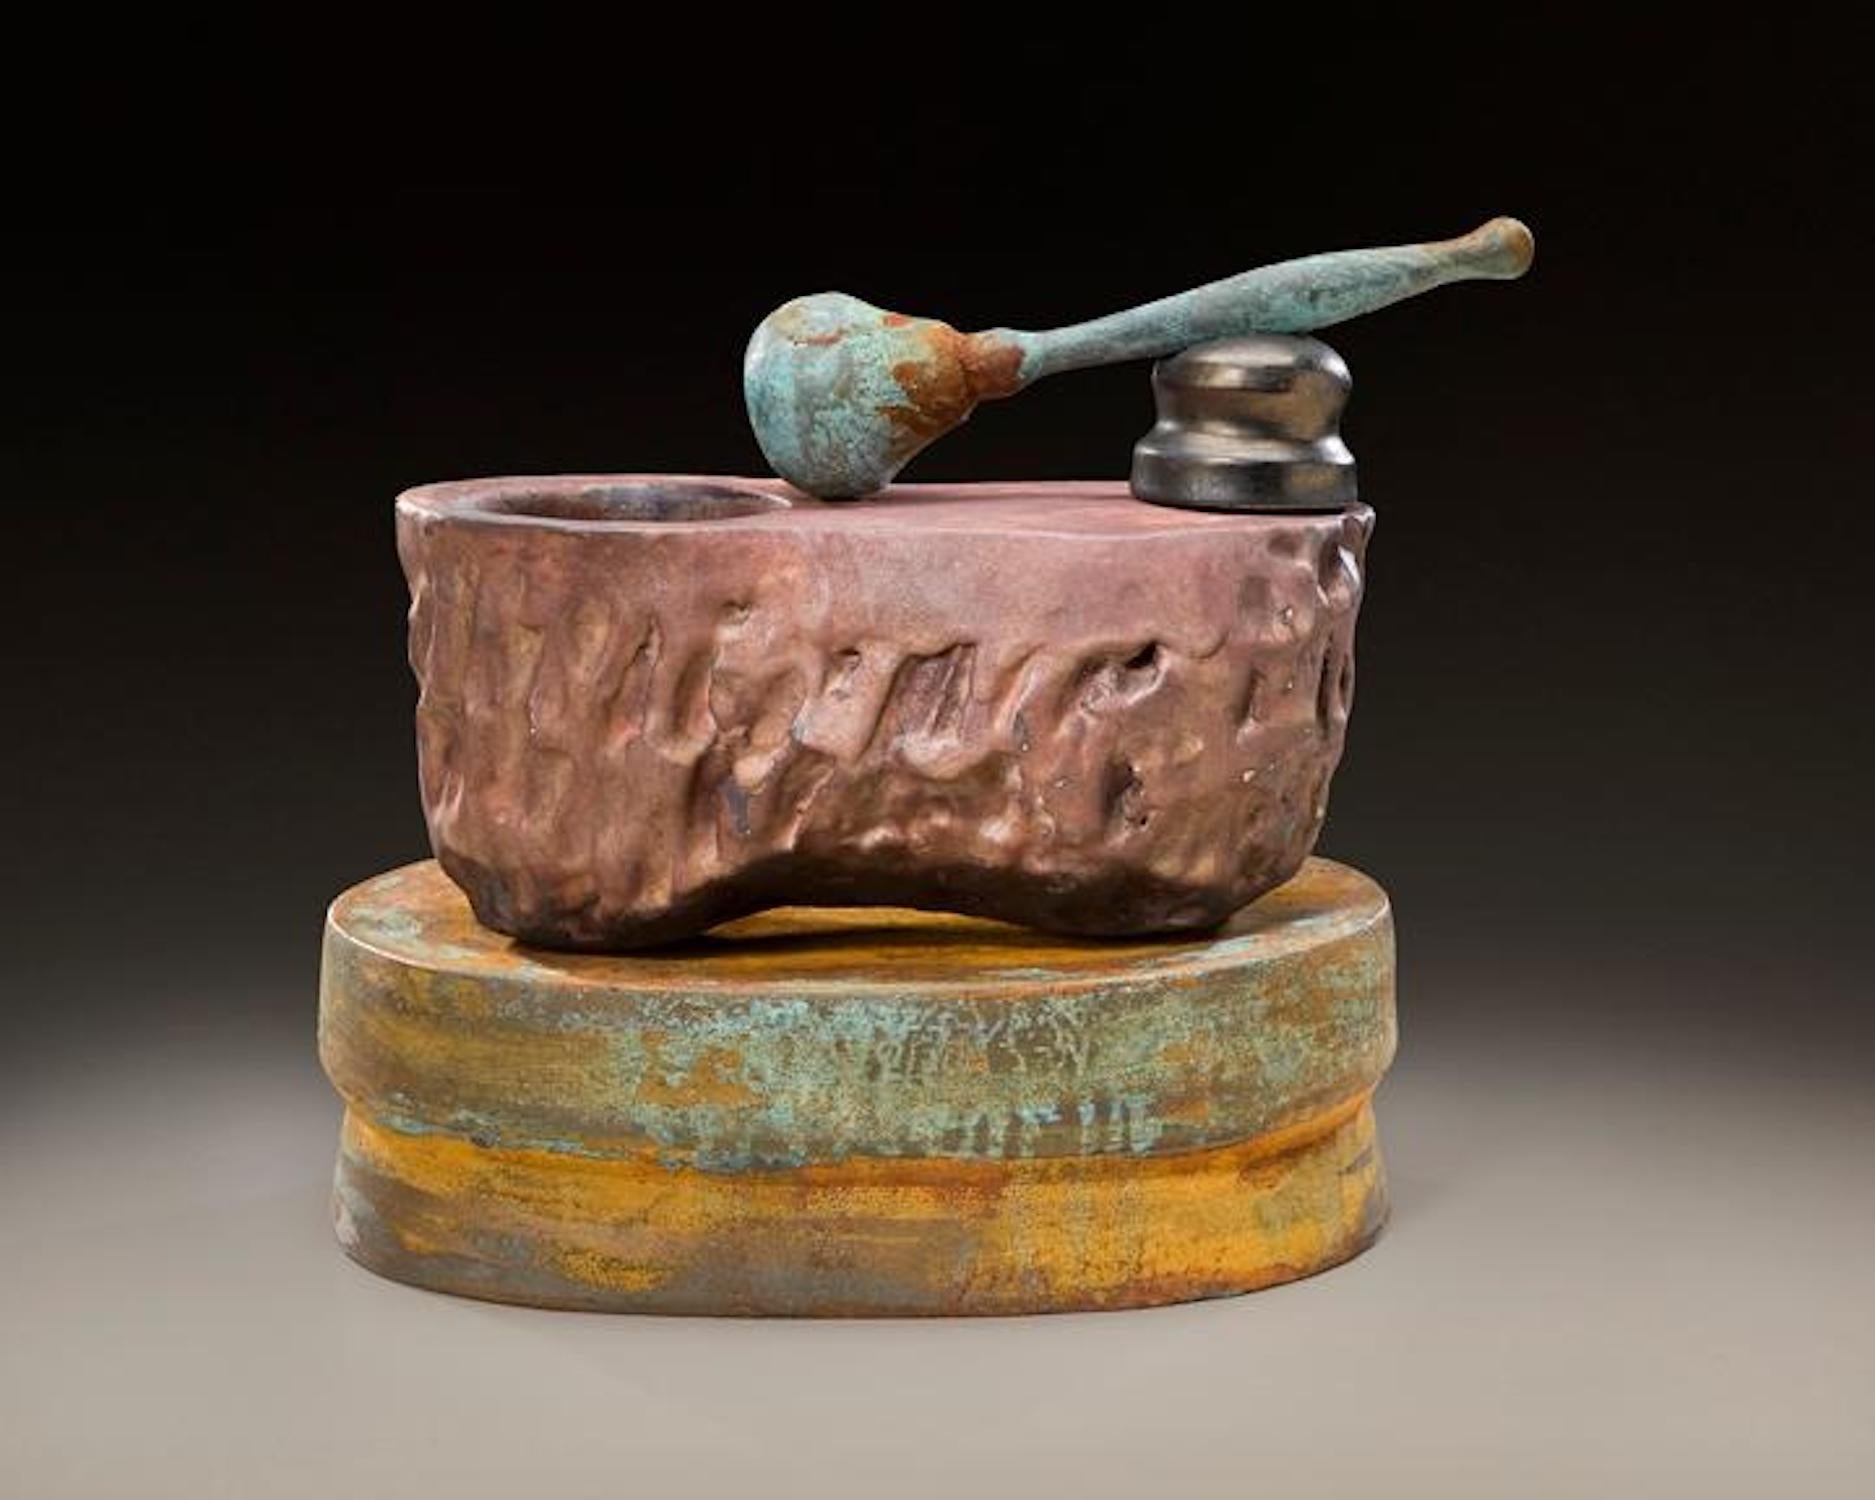 Richard Hirsch Ceramic Mortar and Pestle Sculpture #30, 2009 In Excellent Condition For Sale In New York, NY